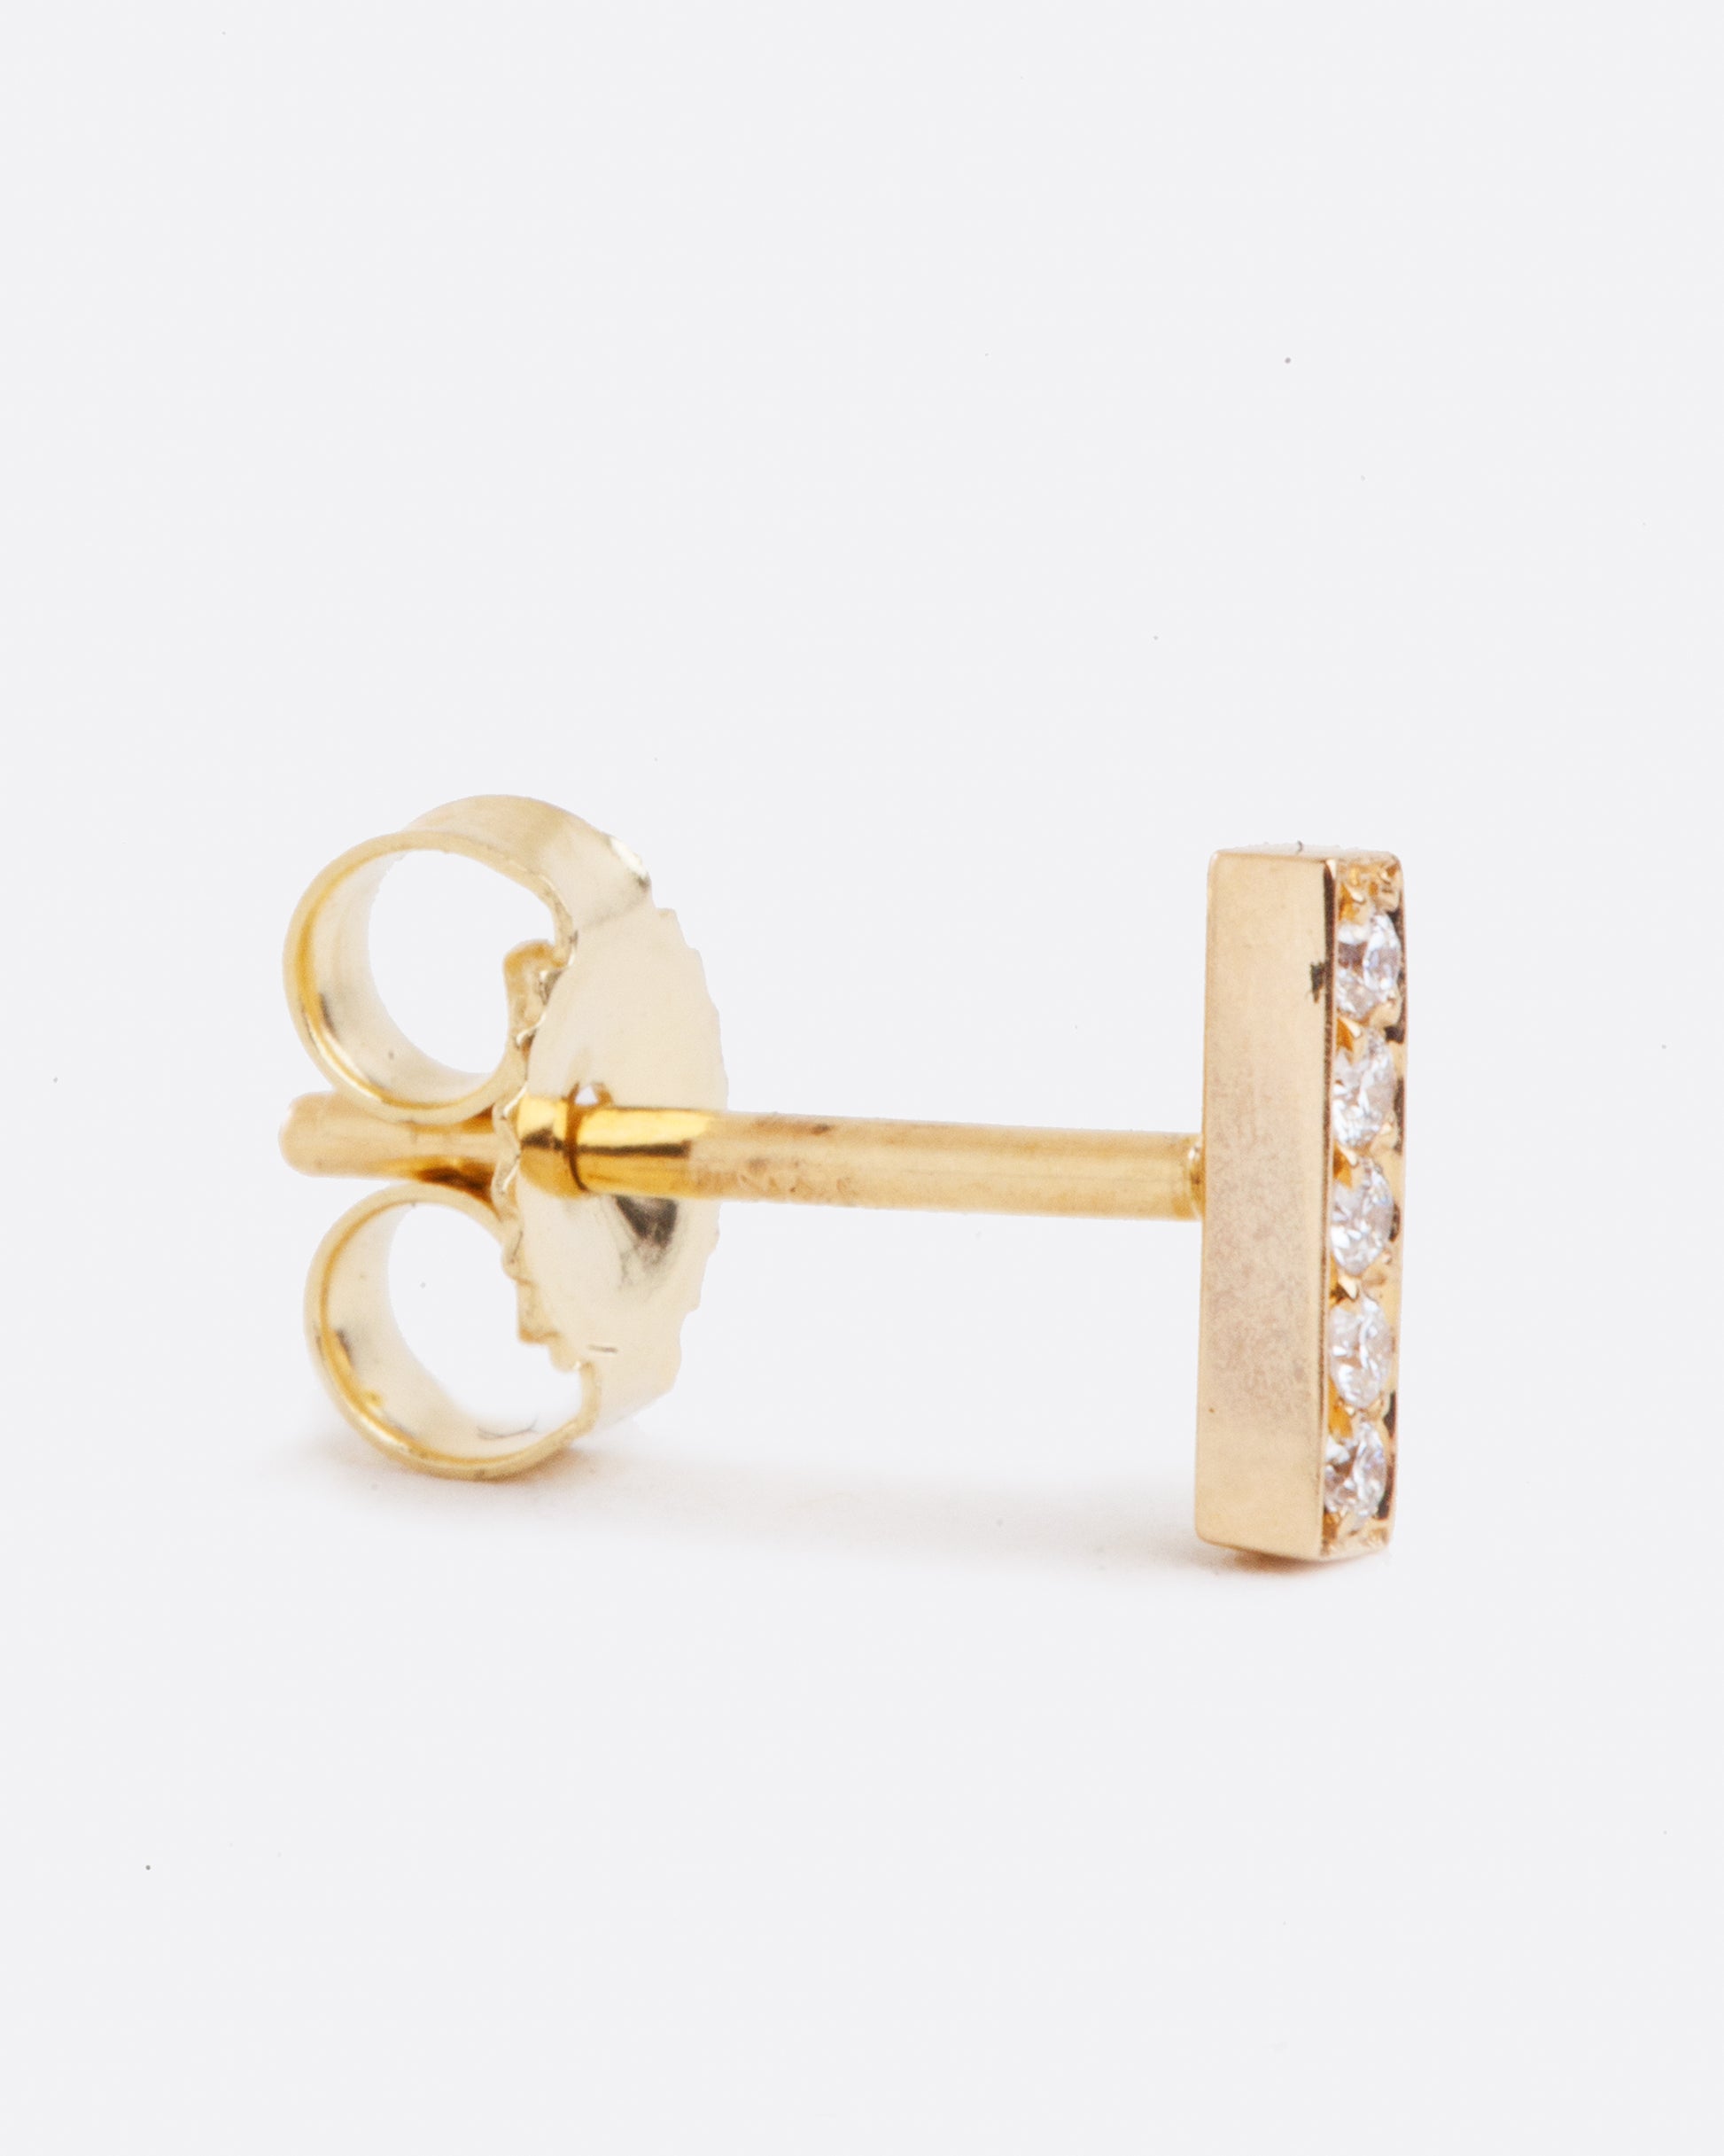 14k yellow gold bar stud earring with five white diamonds by Selin Kent, shown from the side.